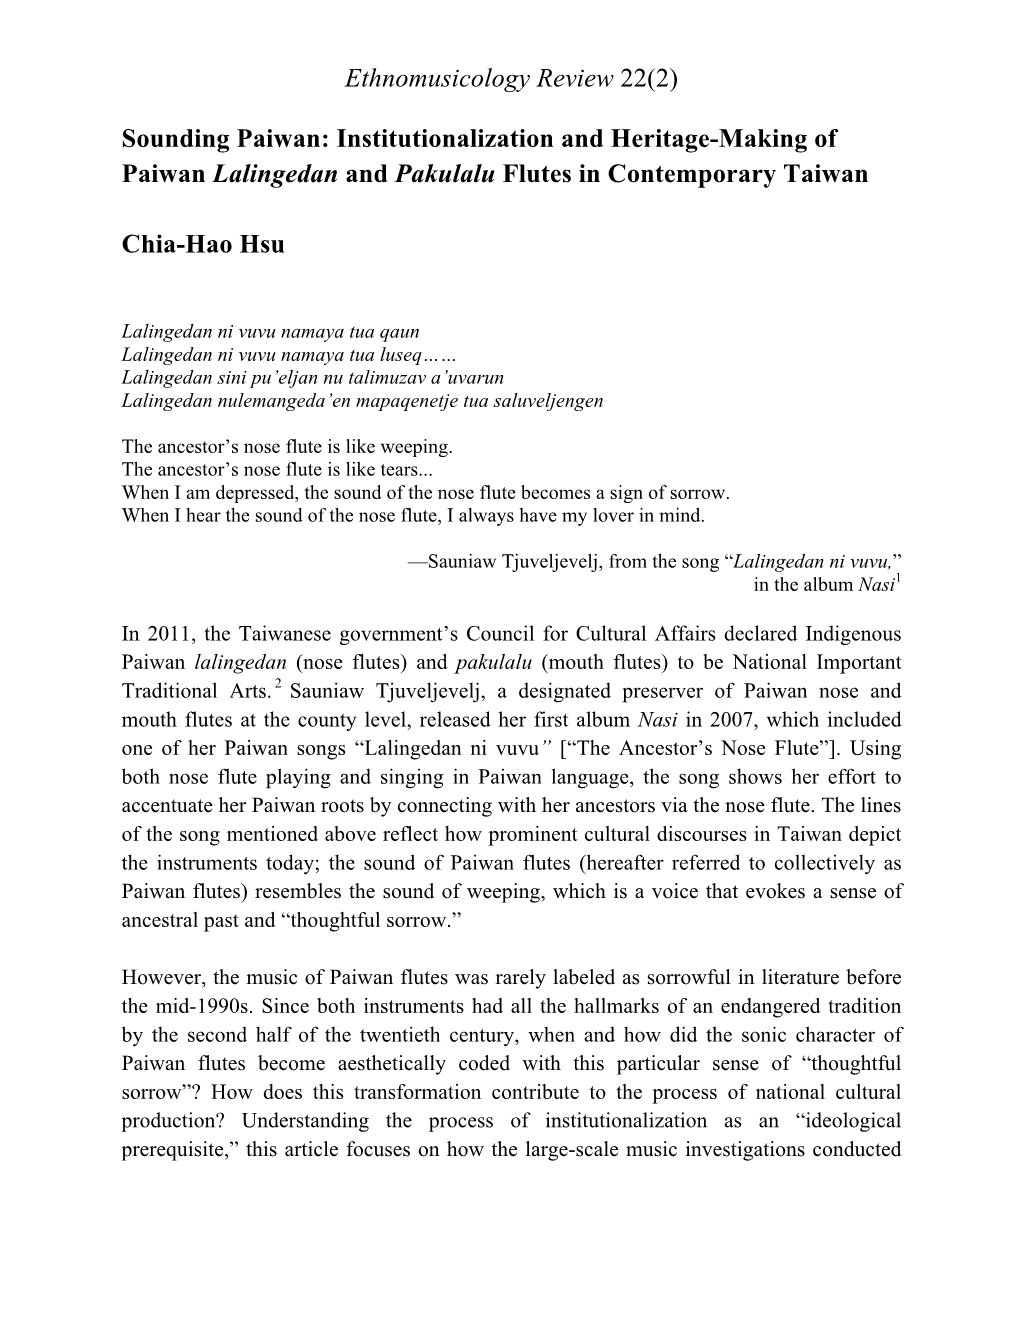 Sounding Paiwan: Institutionalization and Heritage-Making of Paiwan Lalingedan and Pakulalu Flutes in Contemporary Taiwan